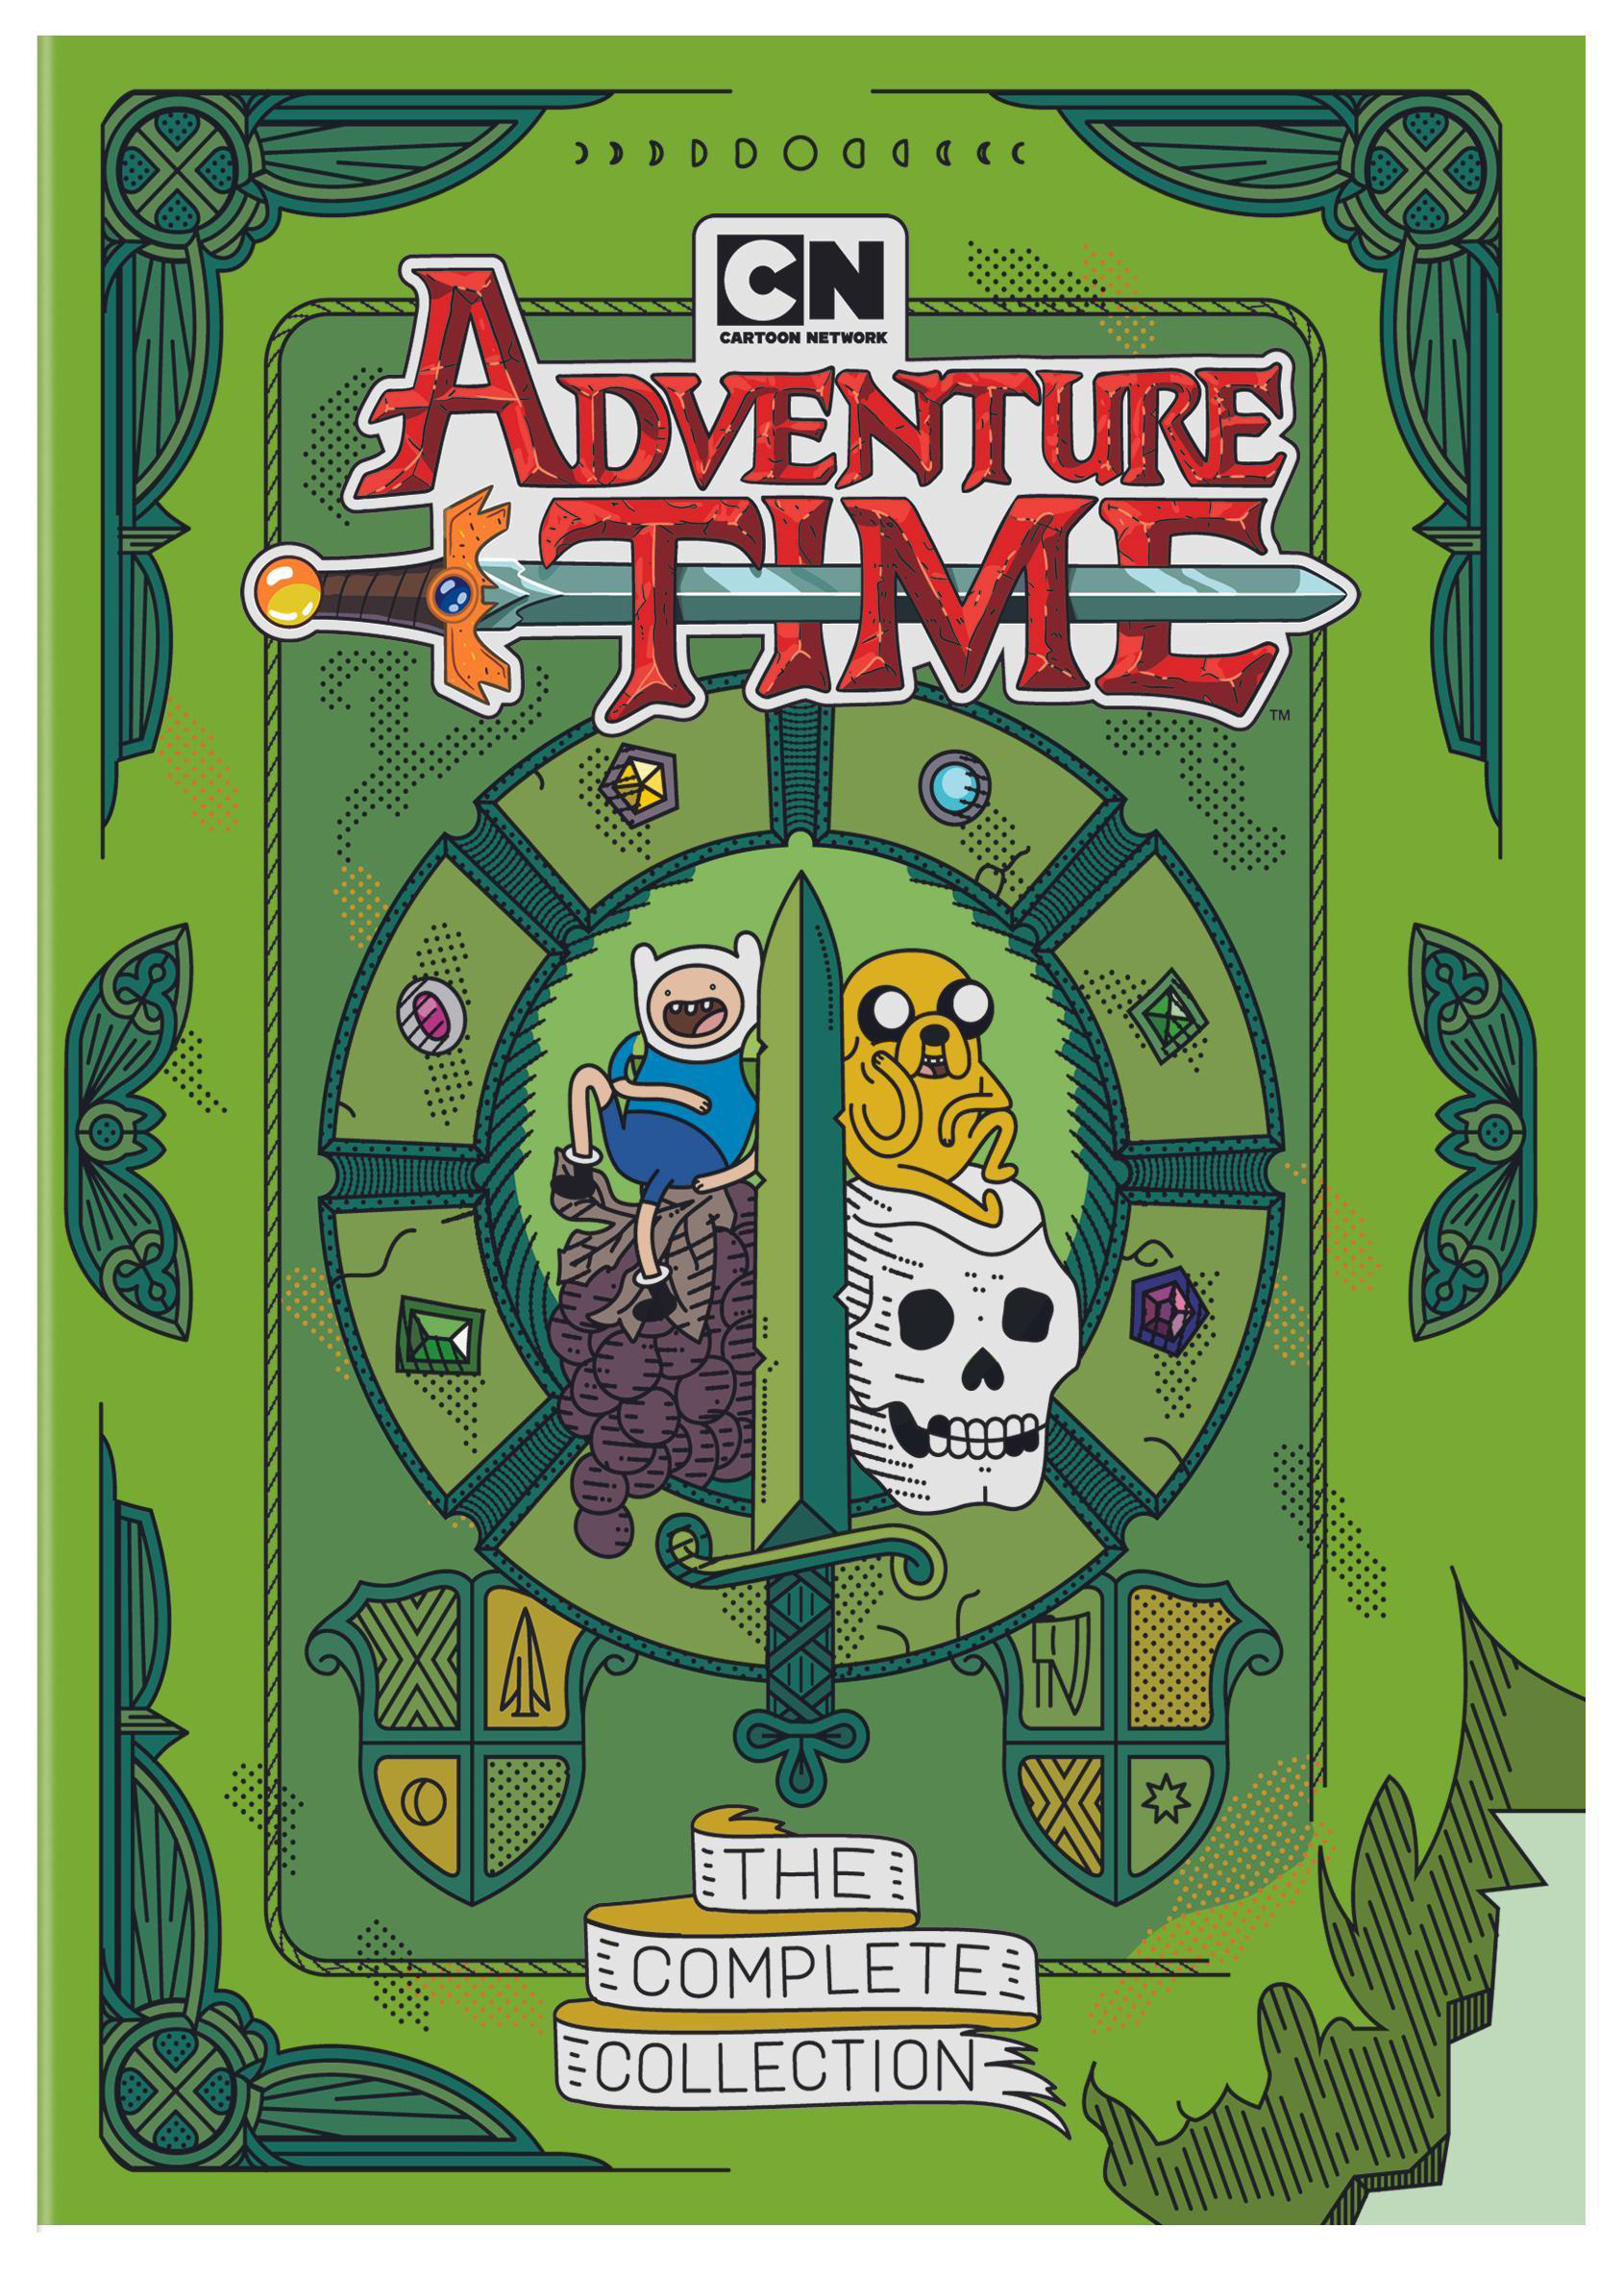 Adventure Time: The Complete Series Standard Edition on DVD